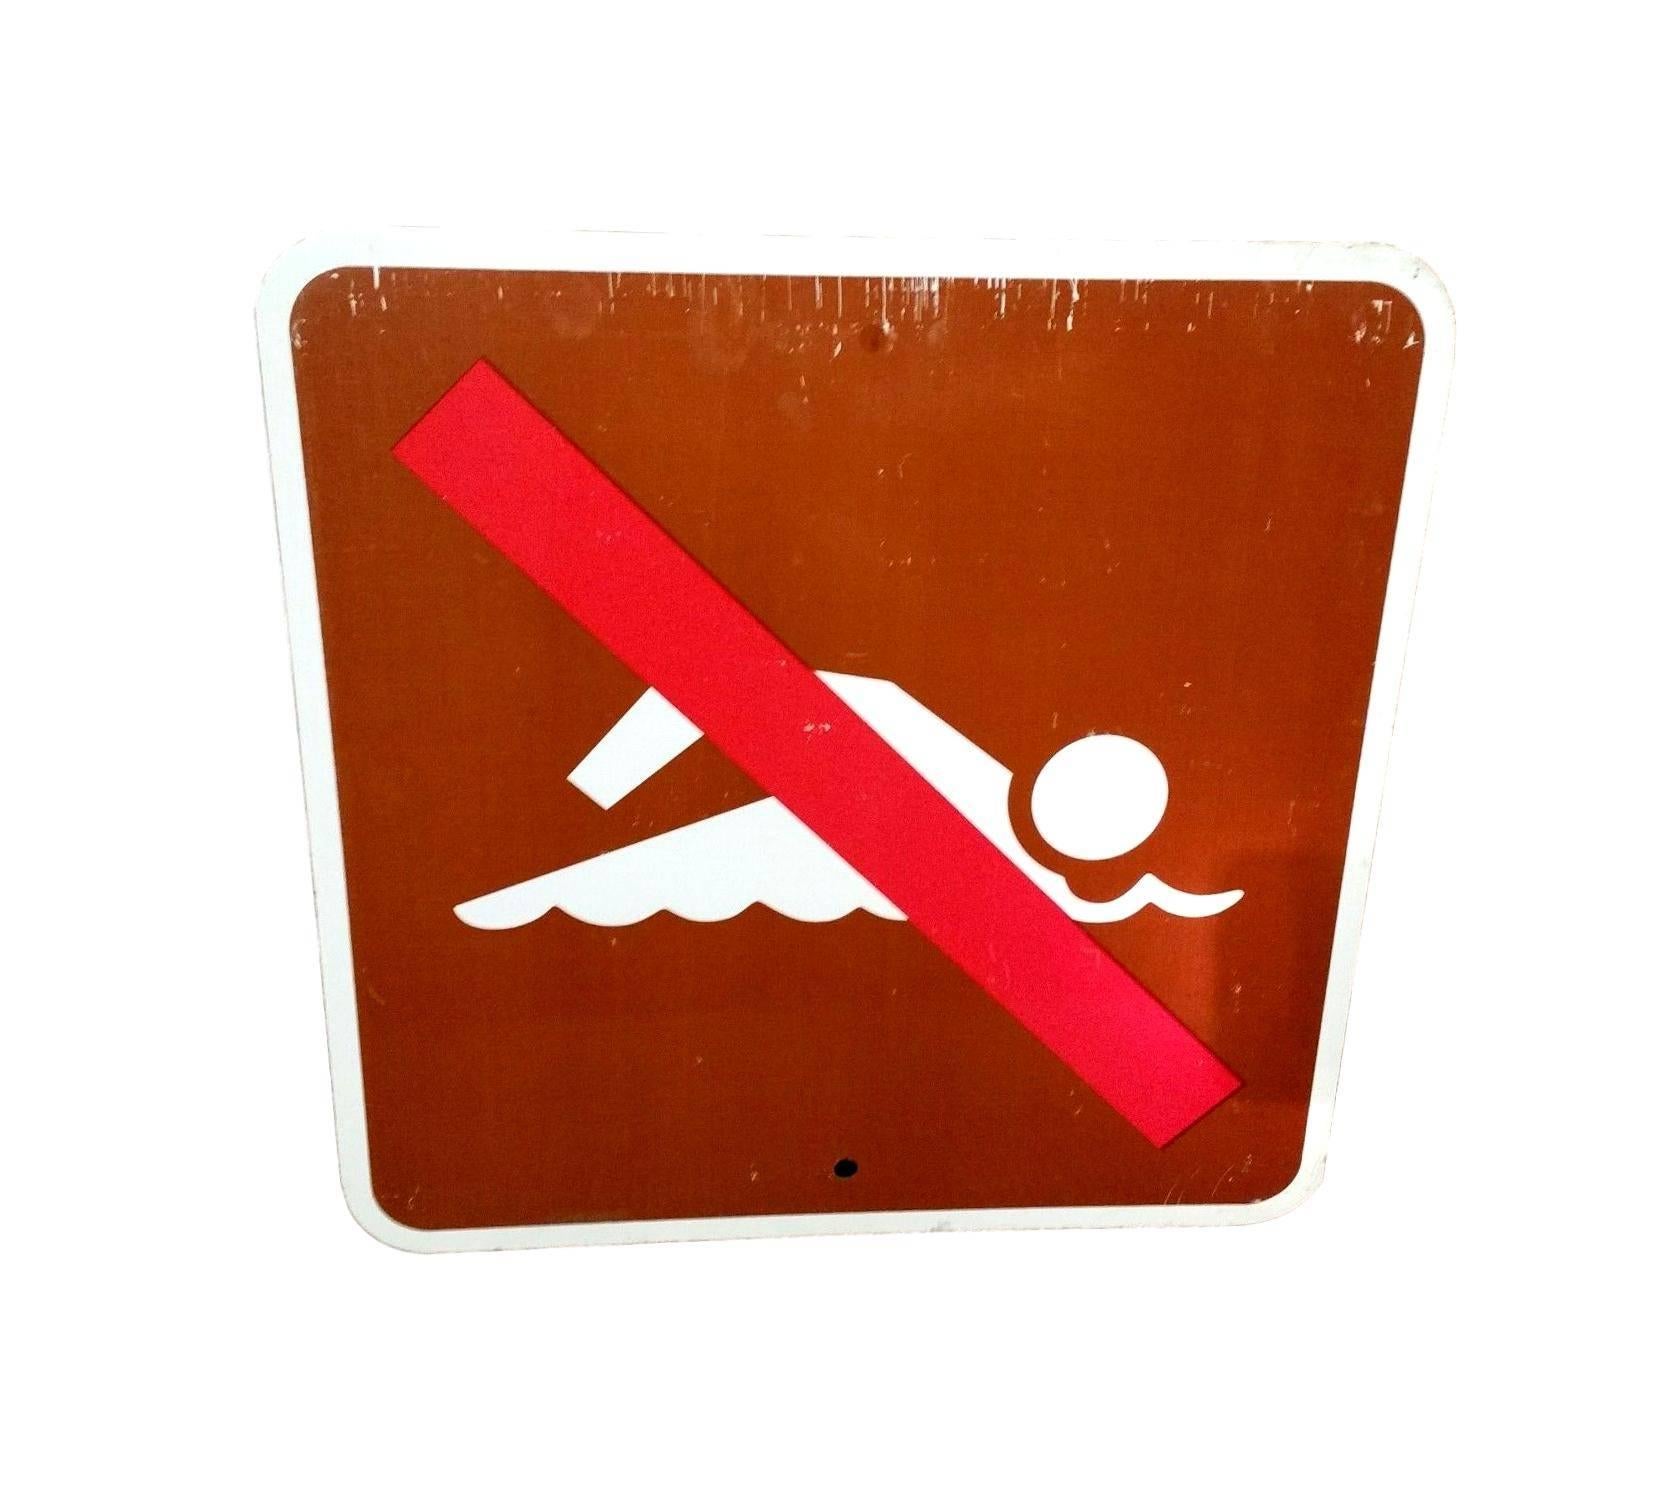 Cool vintage sign from a national state park. Brown sign of a swimmer with a red slash. Great colors. Great pool house or beach house art.